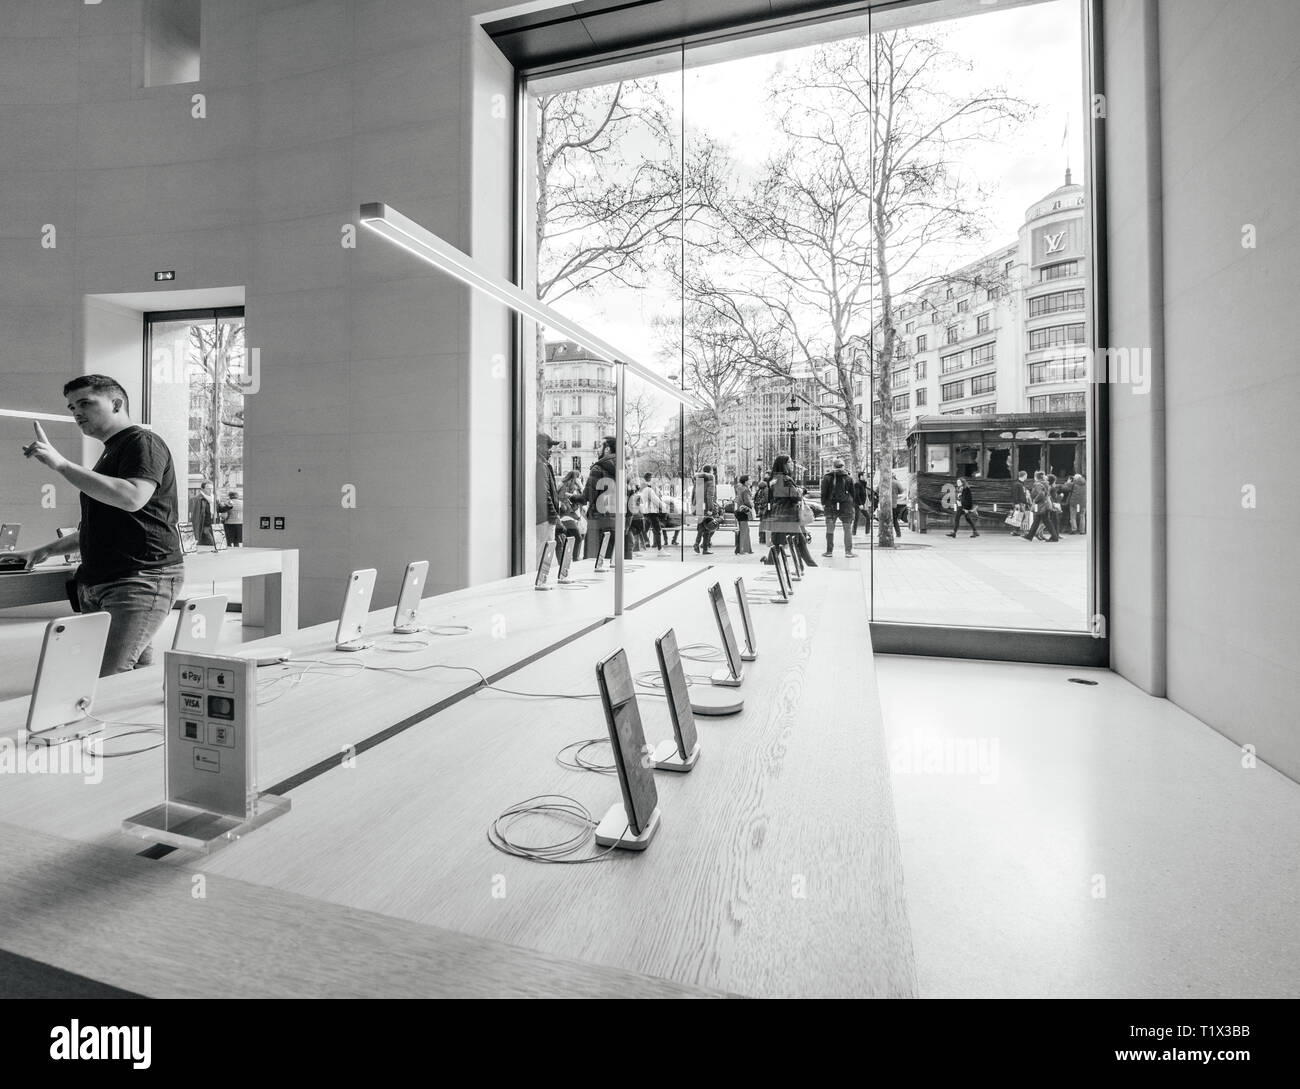 Paris, France - Mar 19 2019: Apple iPhone XS smartphones products are displayed inside the new Apple Store Champs-Elysees with people admiring burnt kiosk outside after yellow vests protest Stock Photo